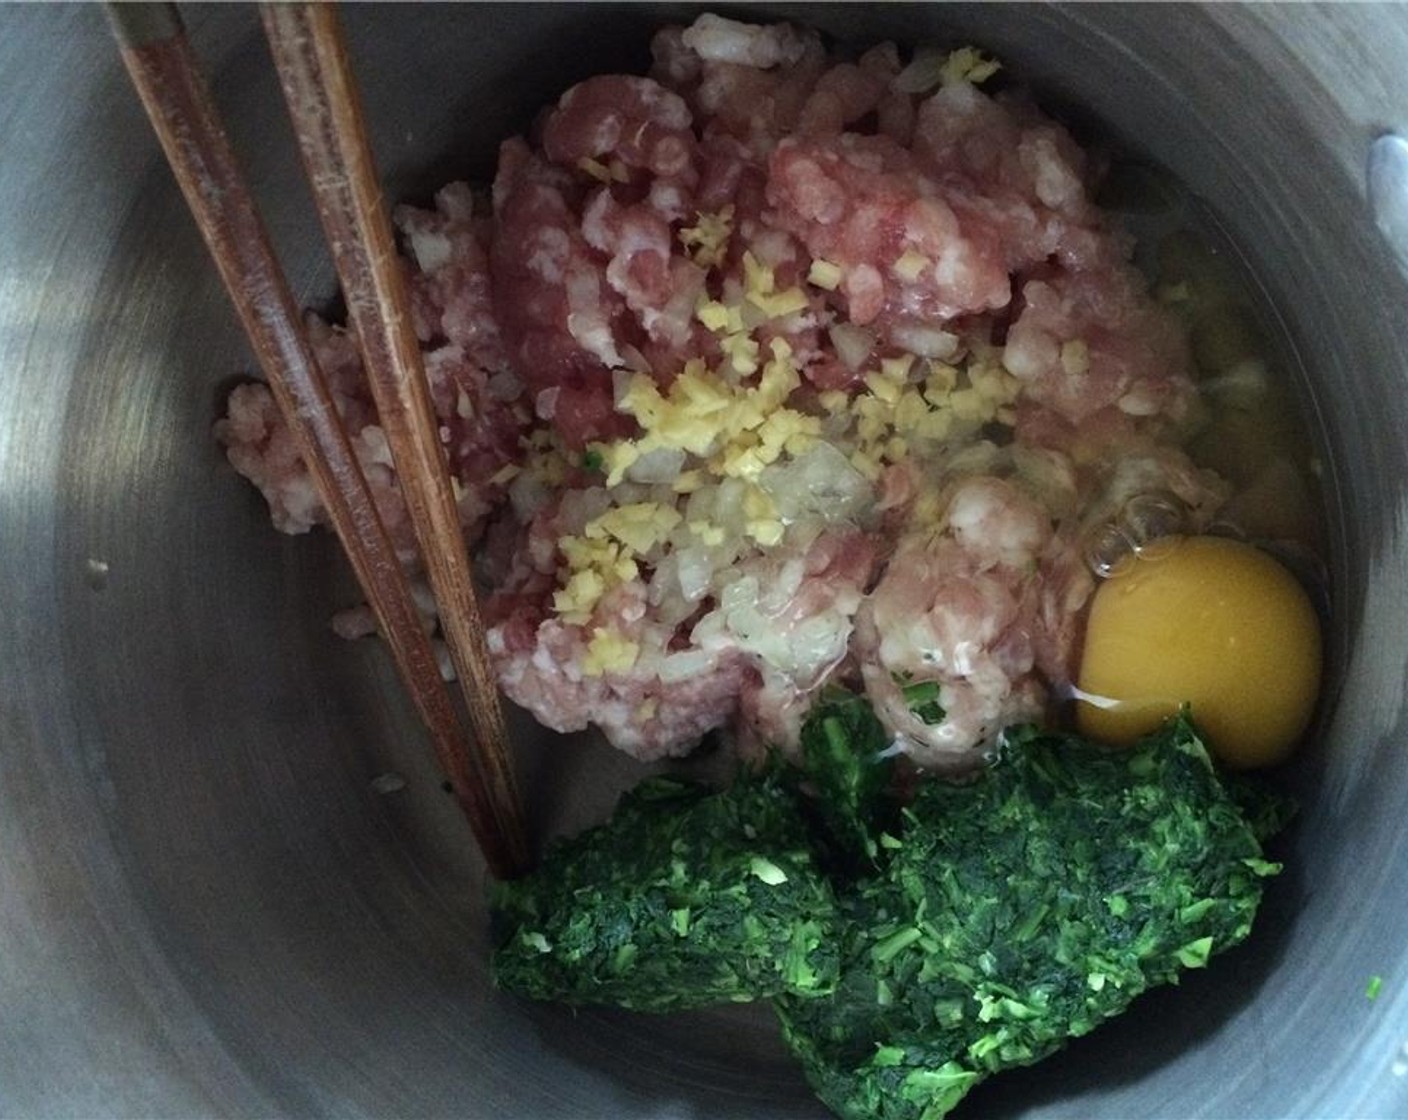 step 5 In a bowl, add the Ground Pork (9 oz), minced ginger, scallion, Egg (1), shepherd's purse, Salt (1 Tbsp), and Chicken Bouillon Powder (1 Tbsp).  Mix everything until combined.